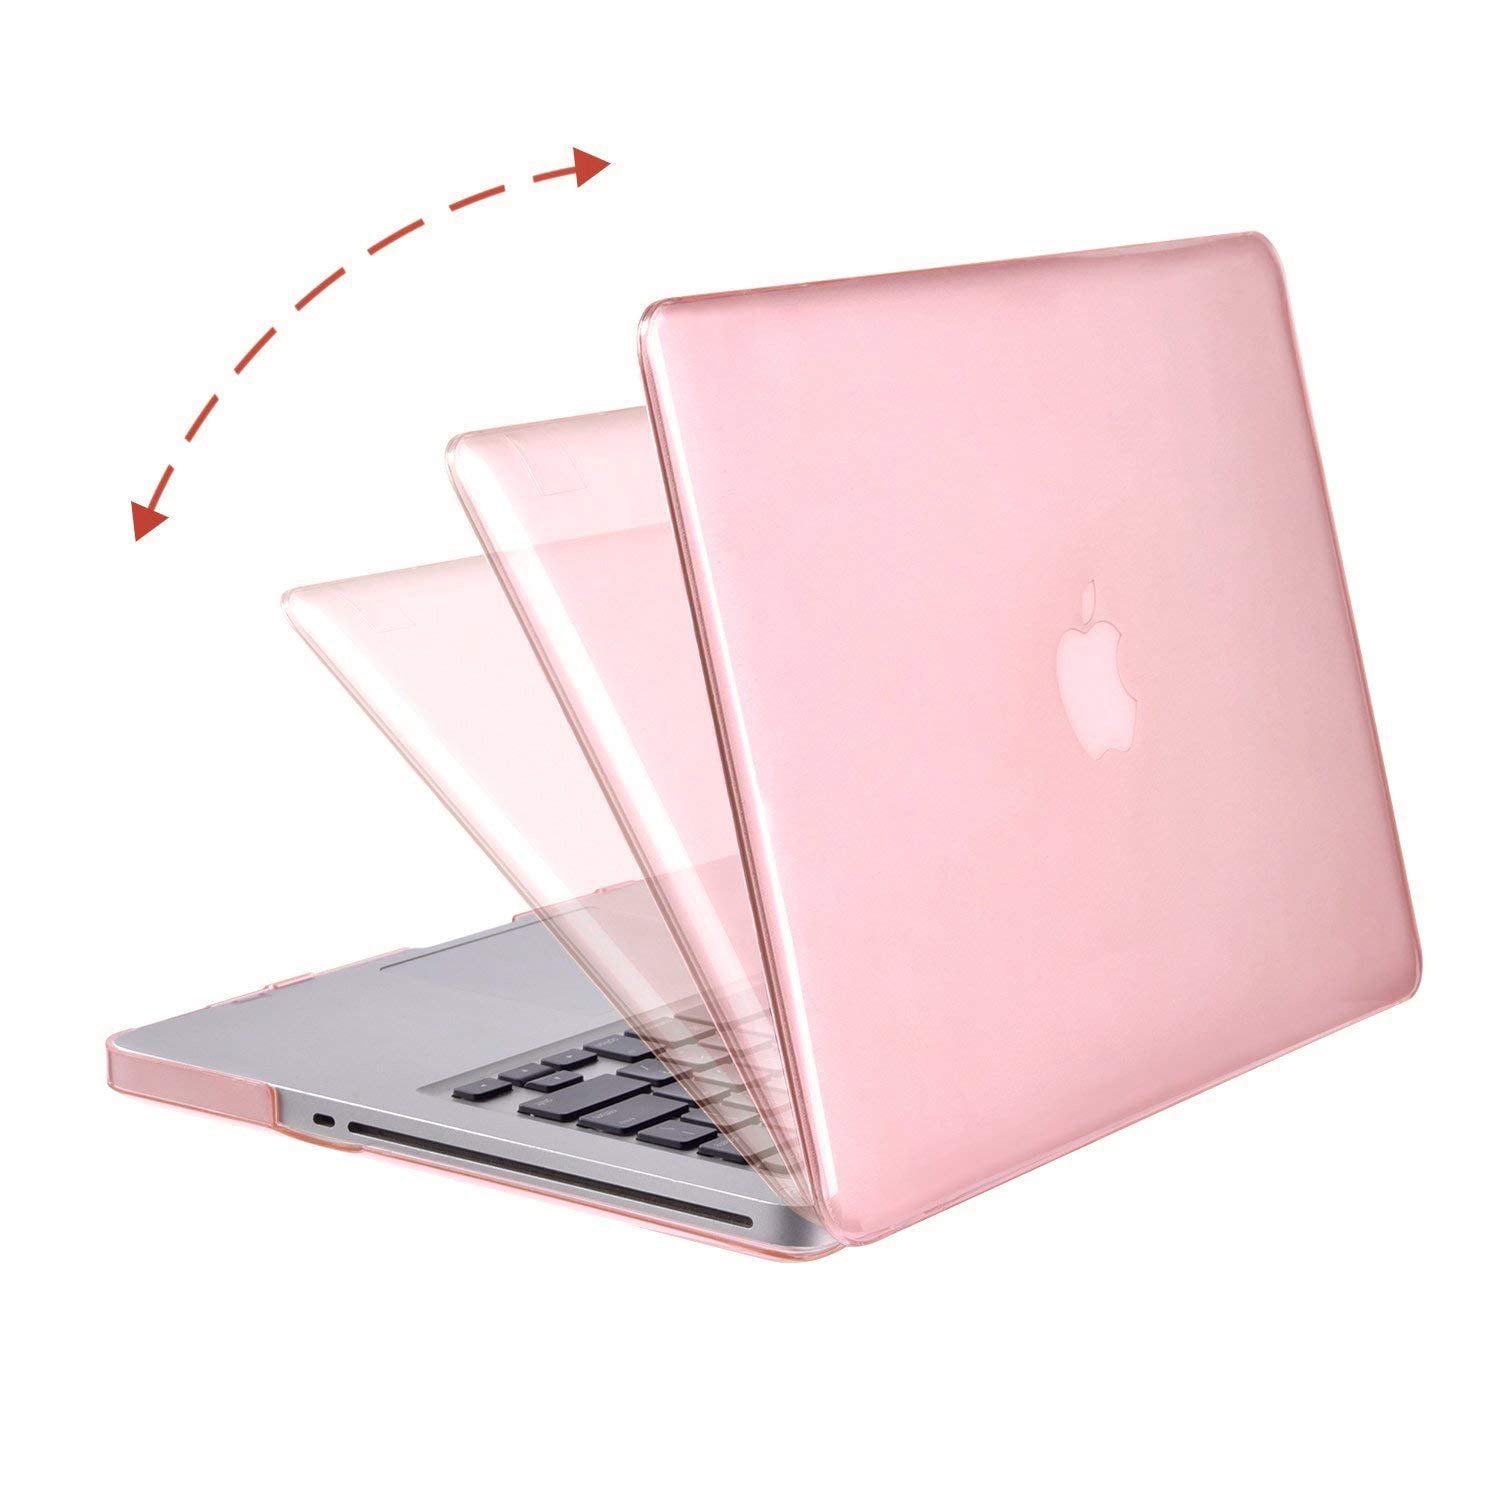 MOSISO Case Only Compatible Older Version MacBook Pro Retina 13 Inch Rose Quartz Plastic Hard Shell & Keyboard Cover & Screen Protector Model: A1502 & A1425 Release 2015 - end 2012 